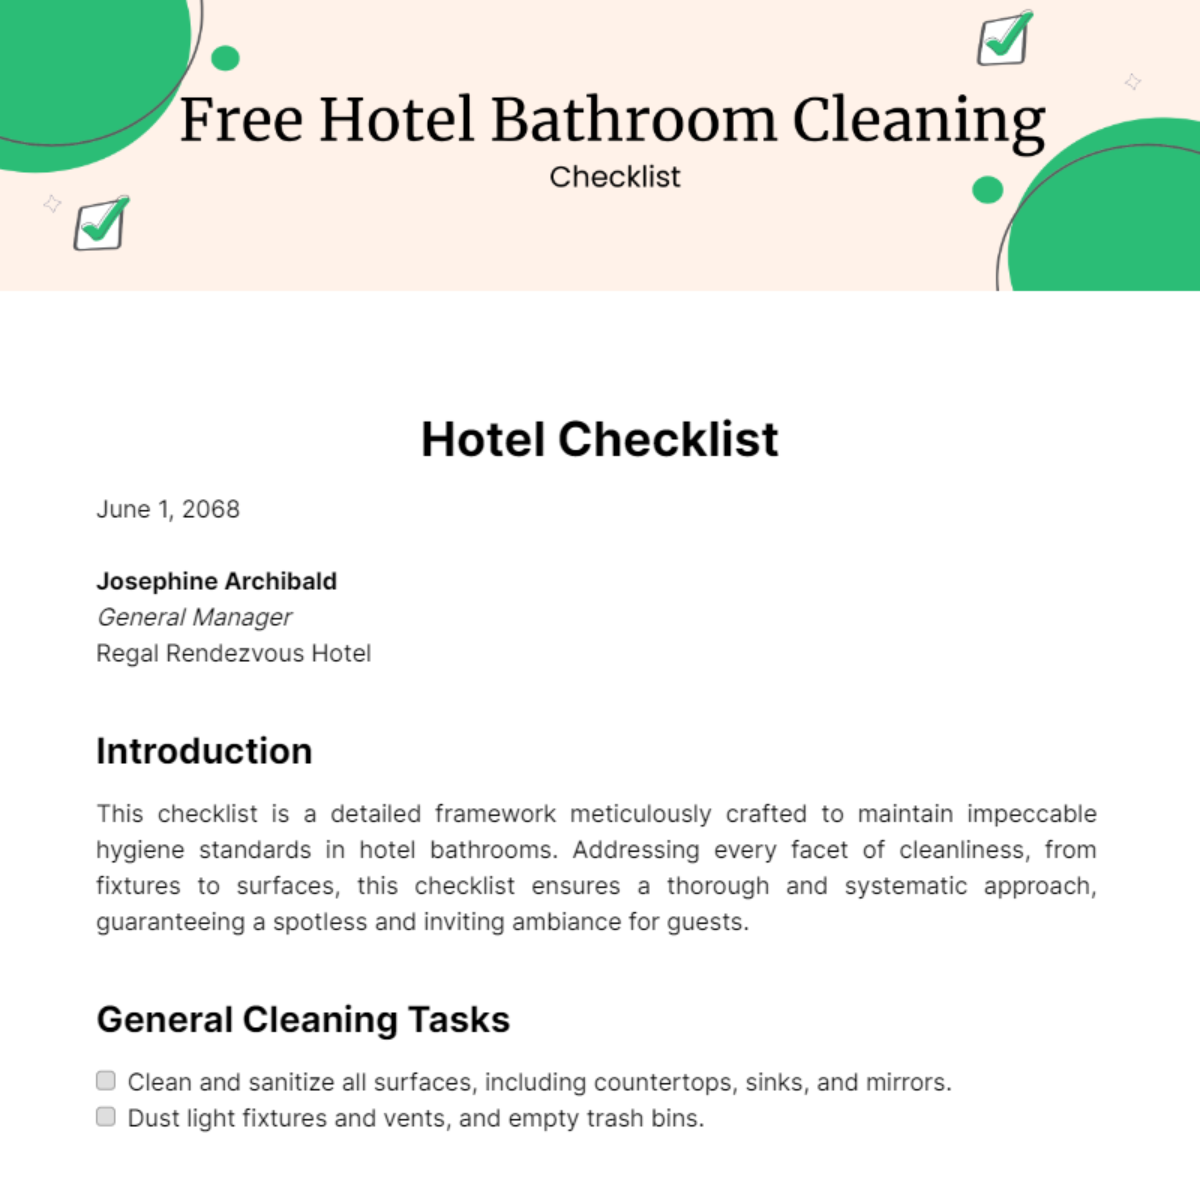 Free Hotel Bathroom Cleaning Checklist Template 